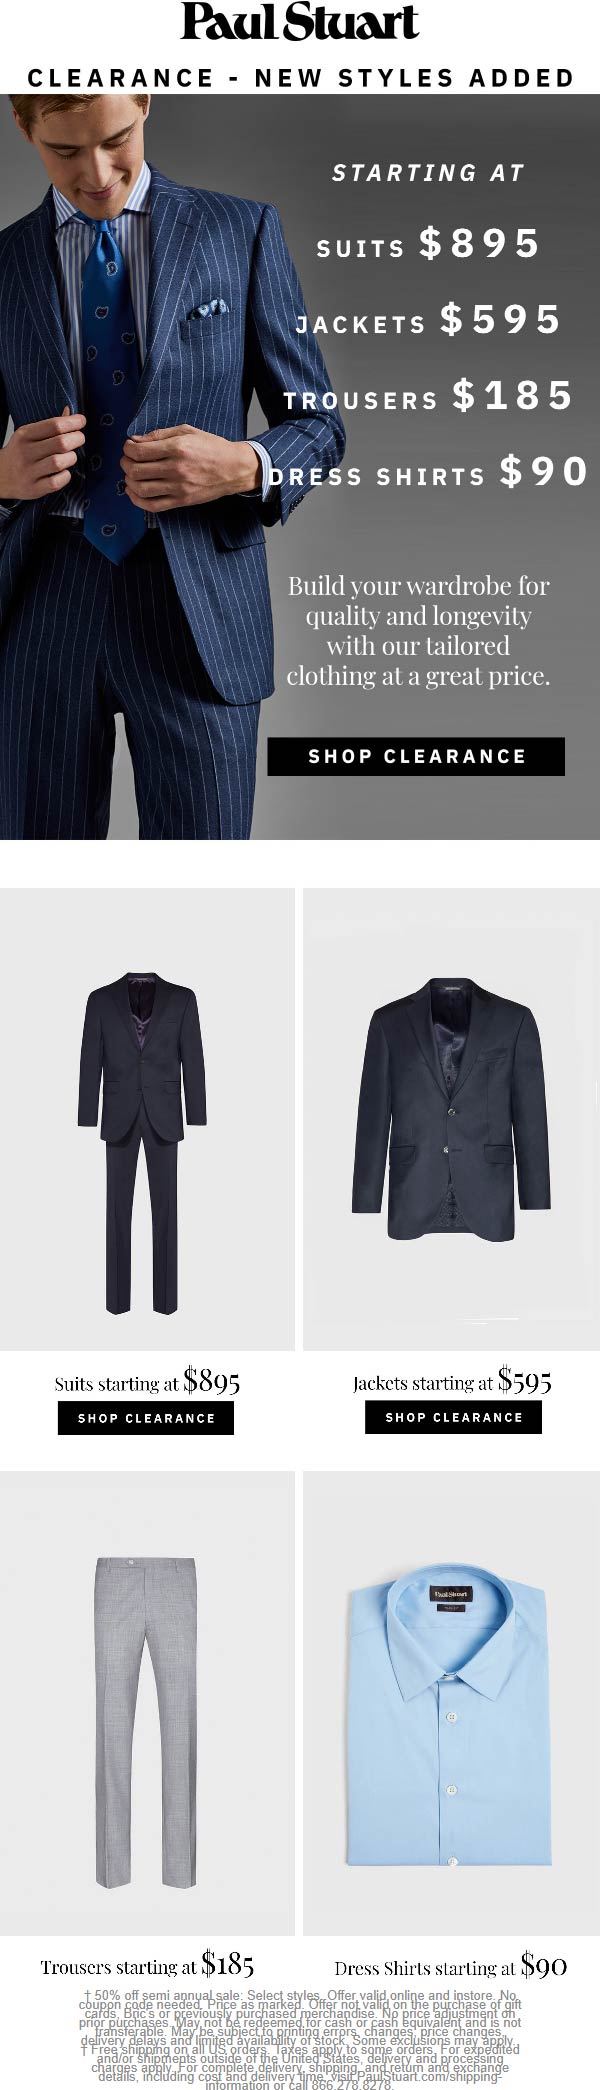 Paul Stuart stores Coupon  50% off clearance going on at Paul Stuart, ditto online #paulstuart paulstuart mensstyle menswear ralphlauren fashion josephabboud phineascole style styleadvice suitsupply brooksbrothers 